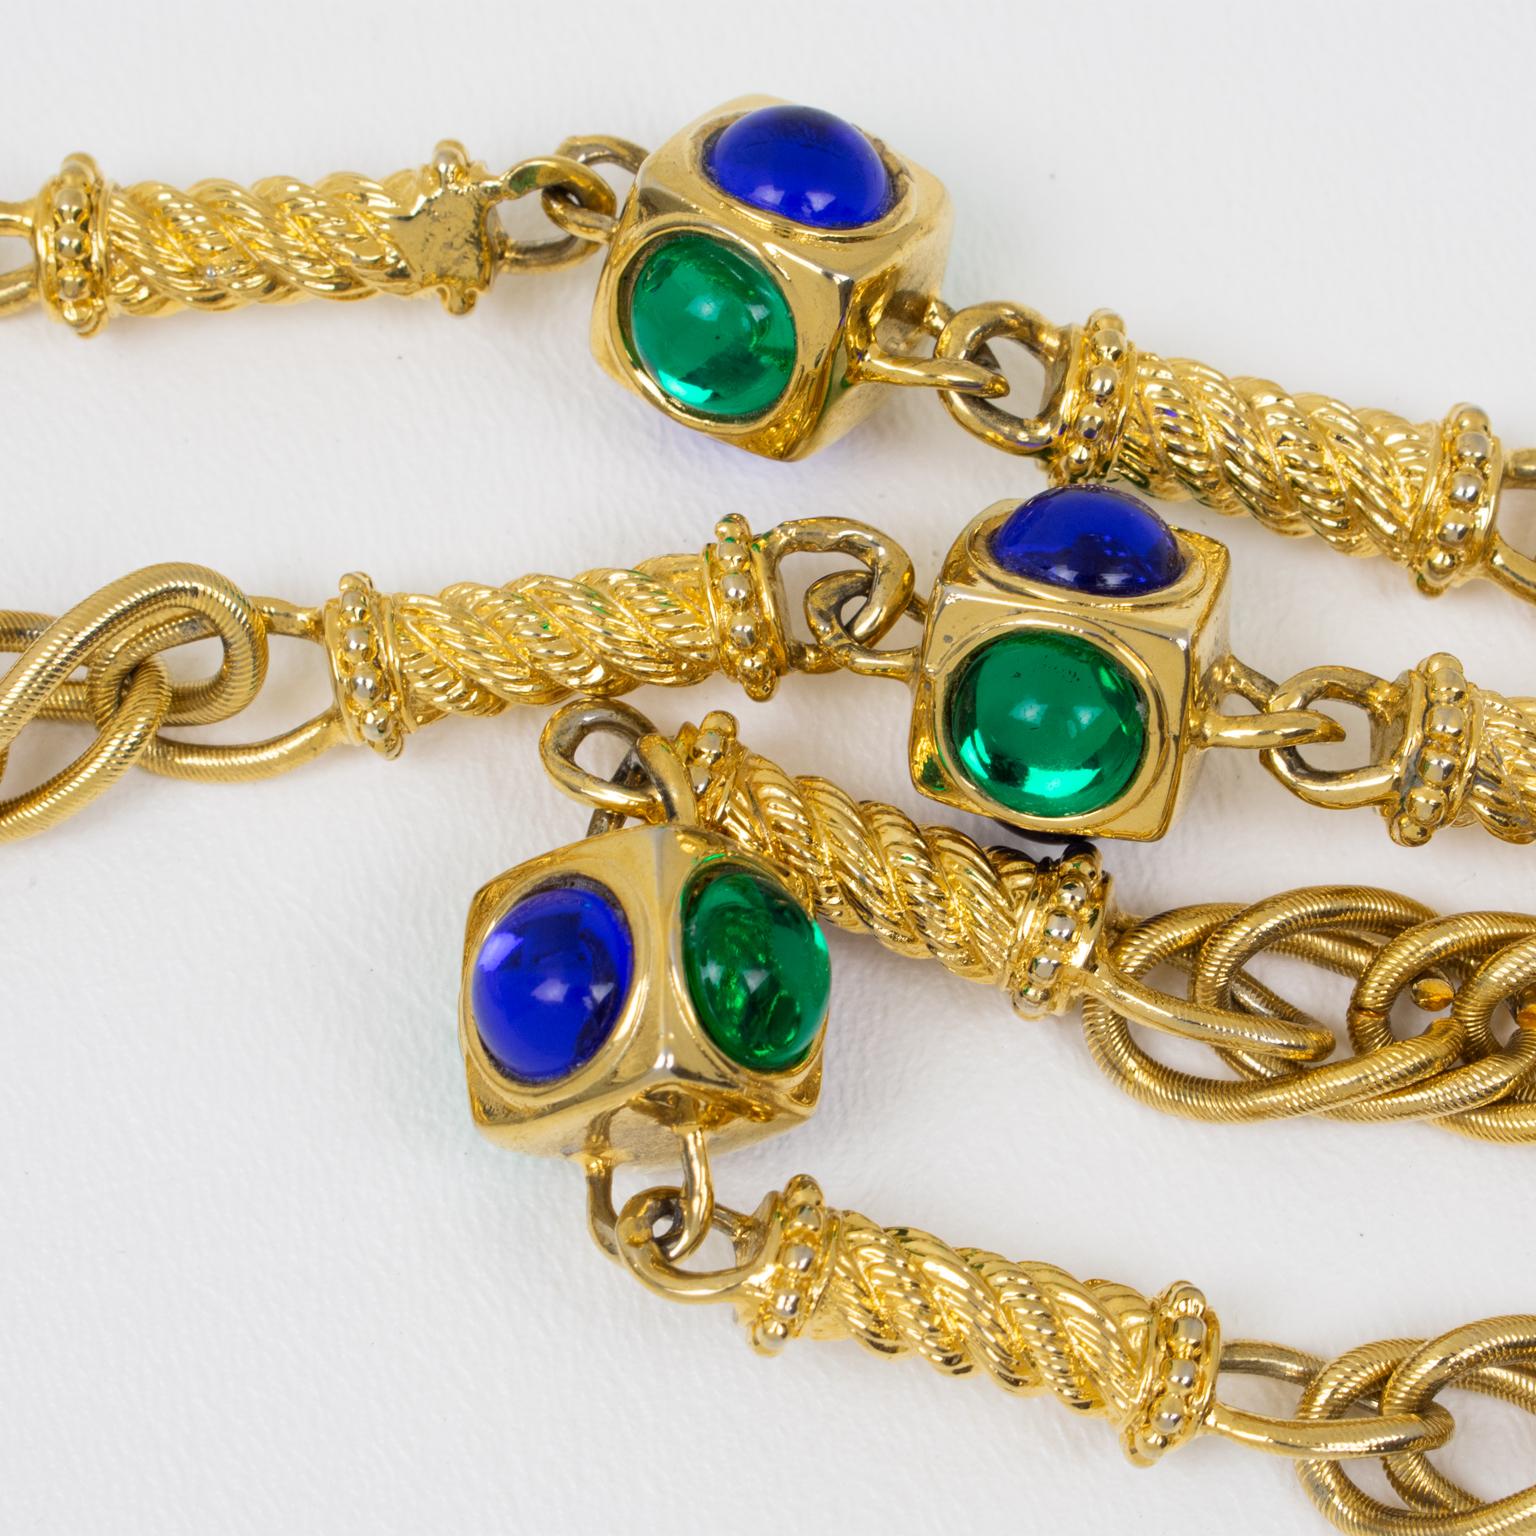 Ungaro Paris Gilt Metal Long Necklace with Blue and Green Resin Cabochons For Sale 1